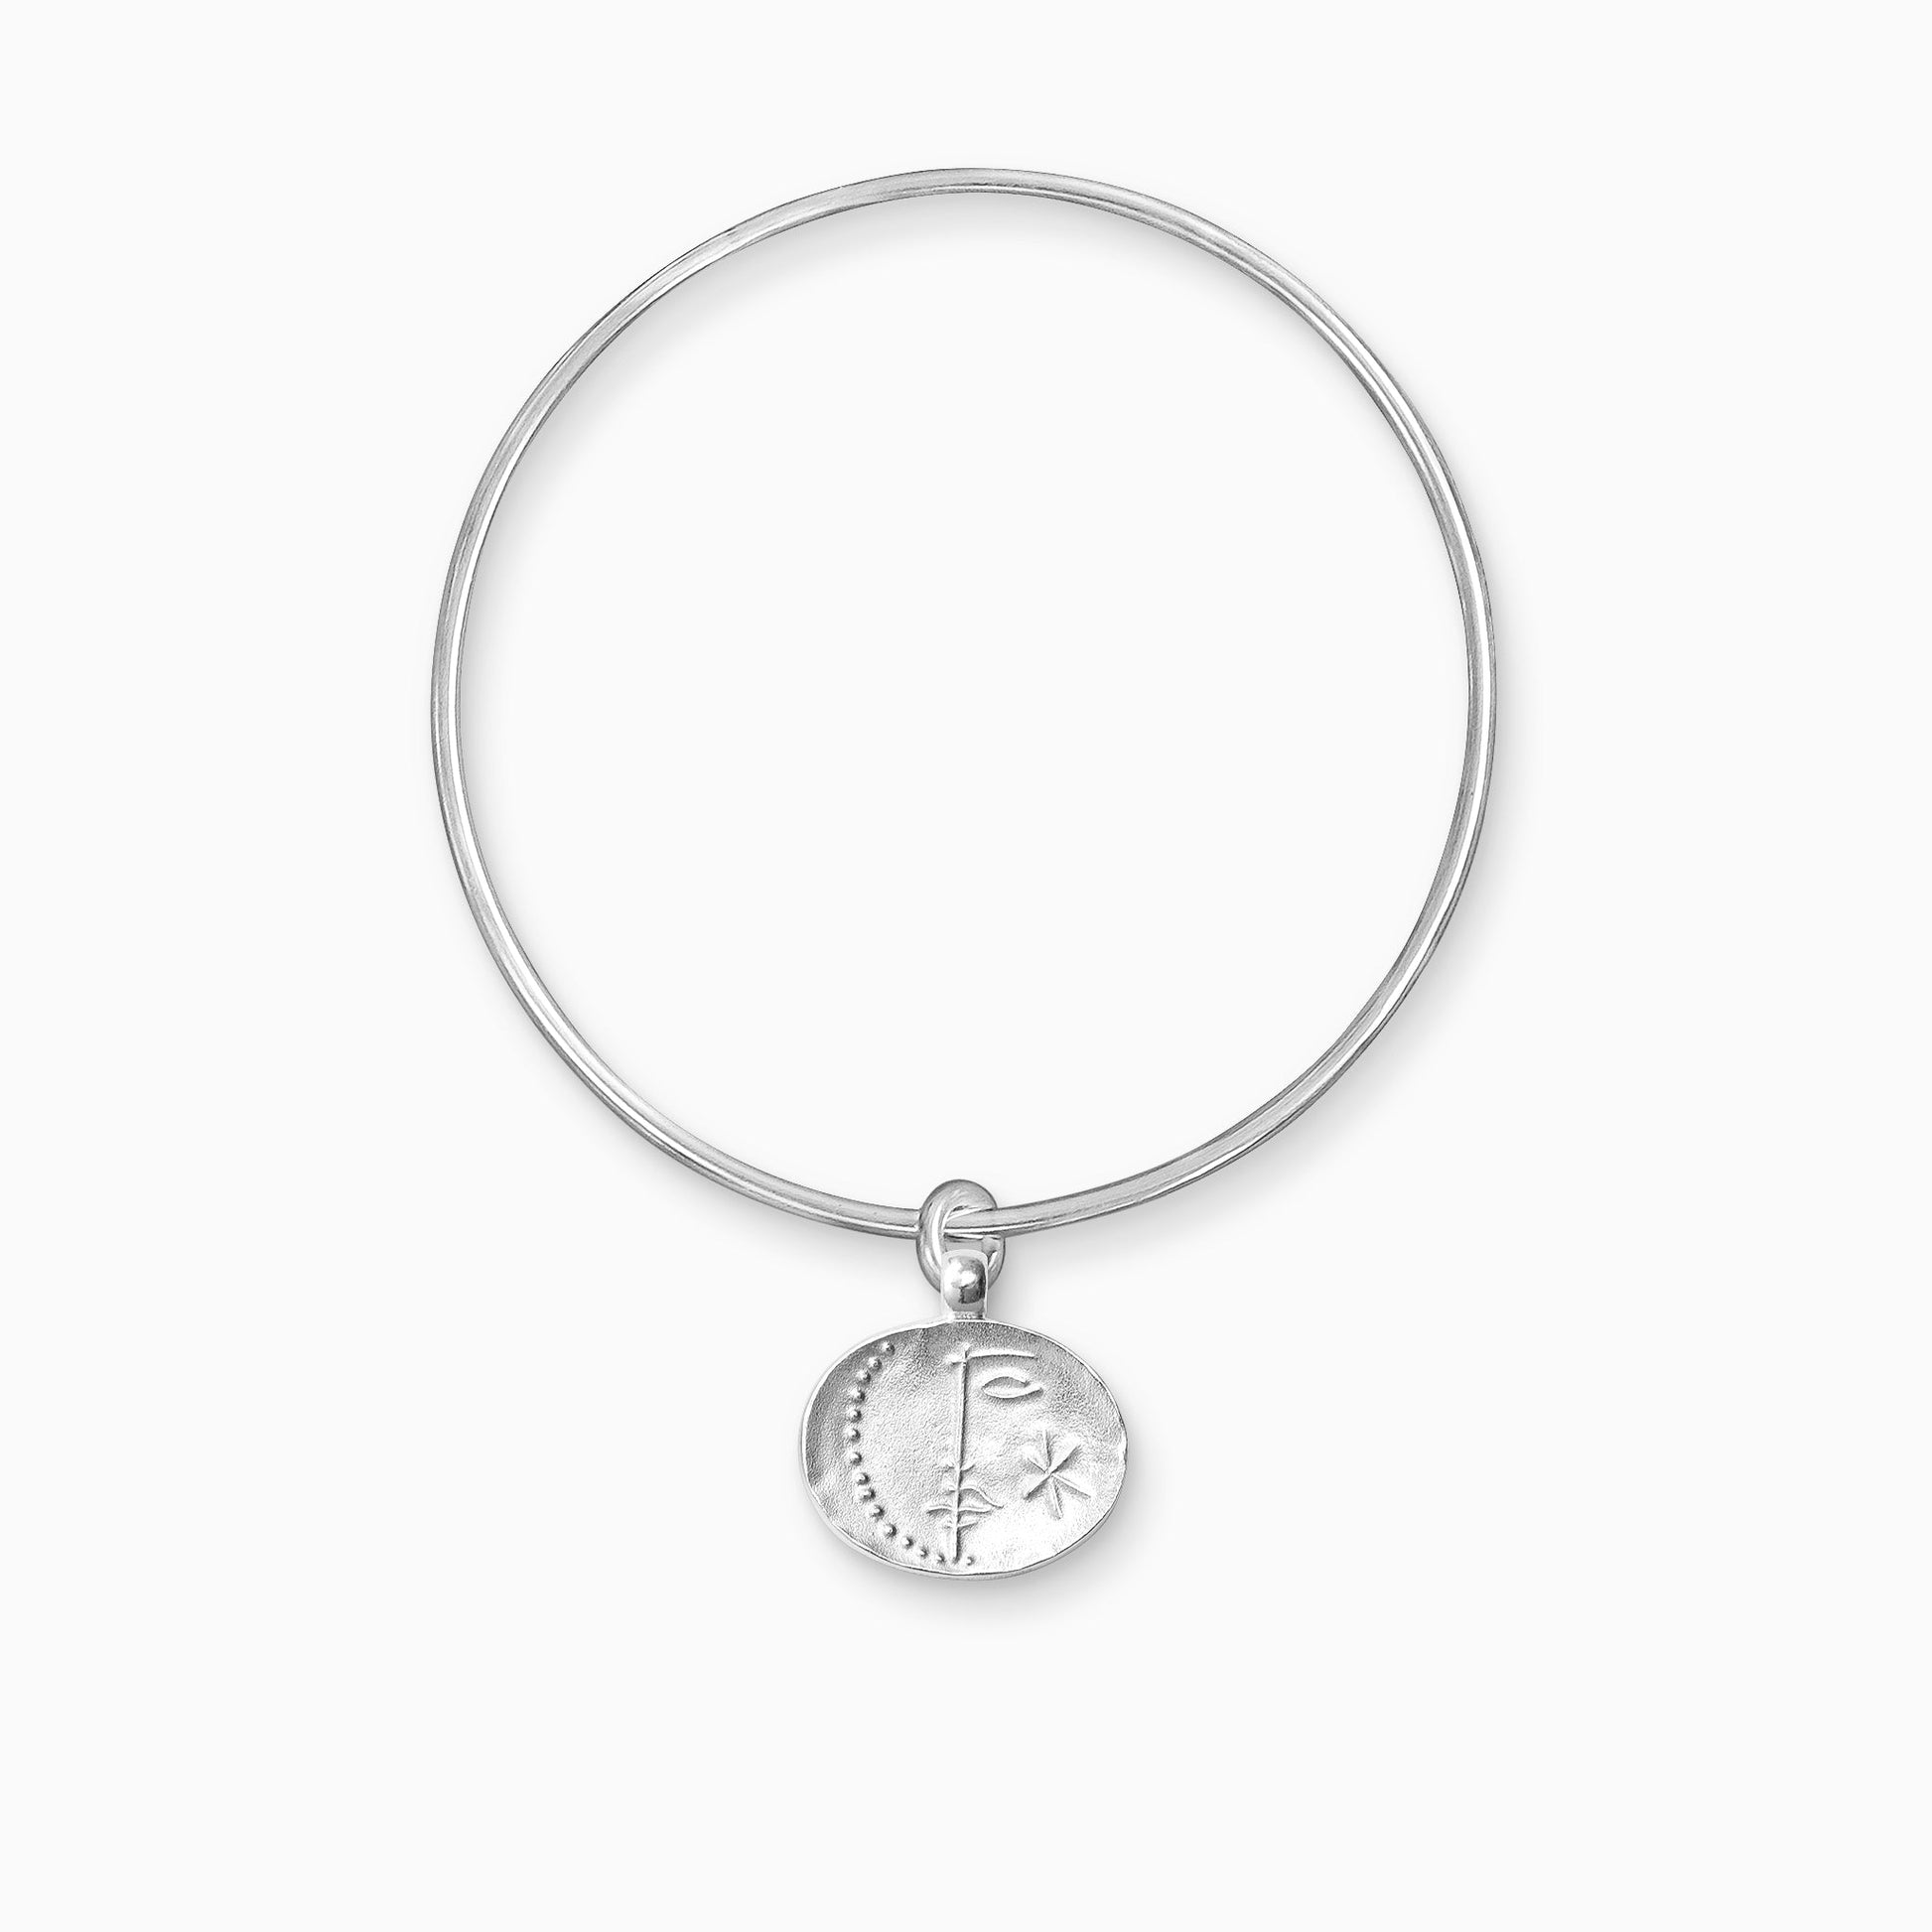 A recycled Silver oval shaped charm with raised image of a Sun on one side and a Moon on the other, freely moving on a round wire bangle.  Charm 16mm x 20mm. Bangle 63mm inside diameter x 2mm round wire.